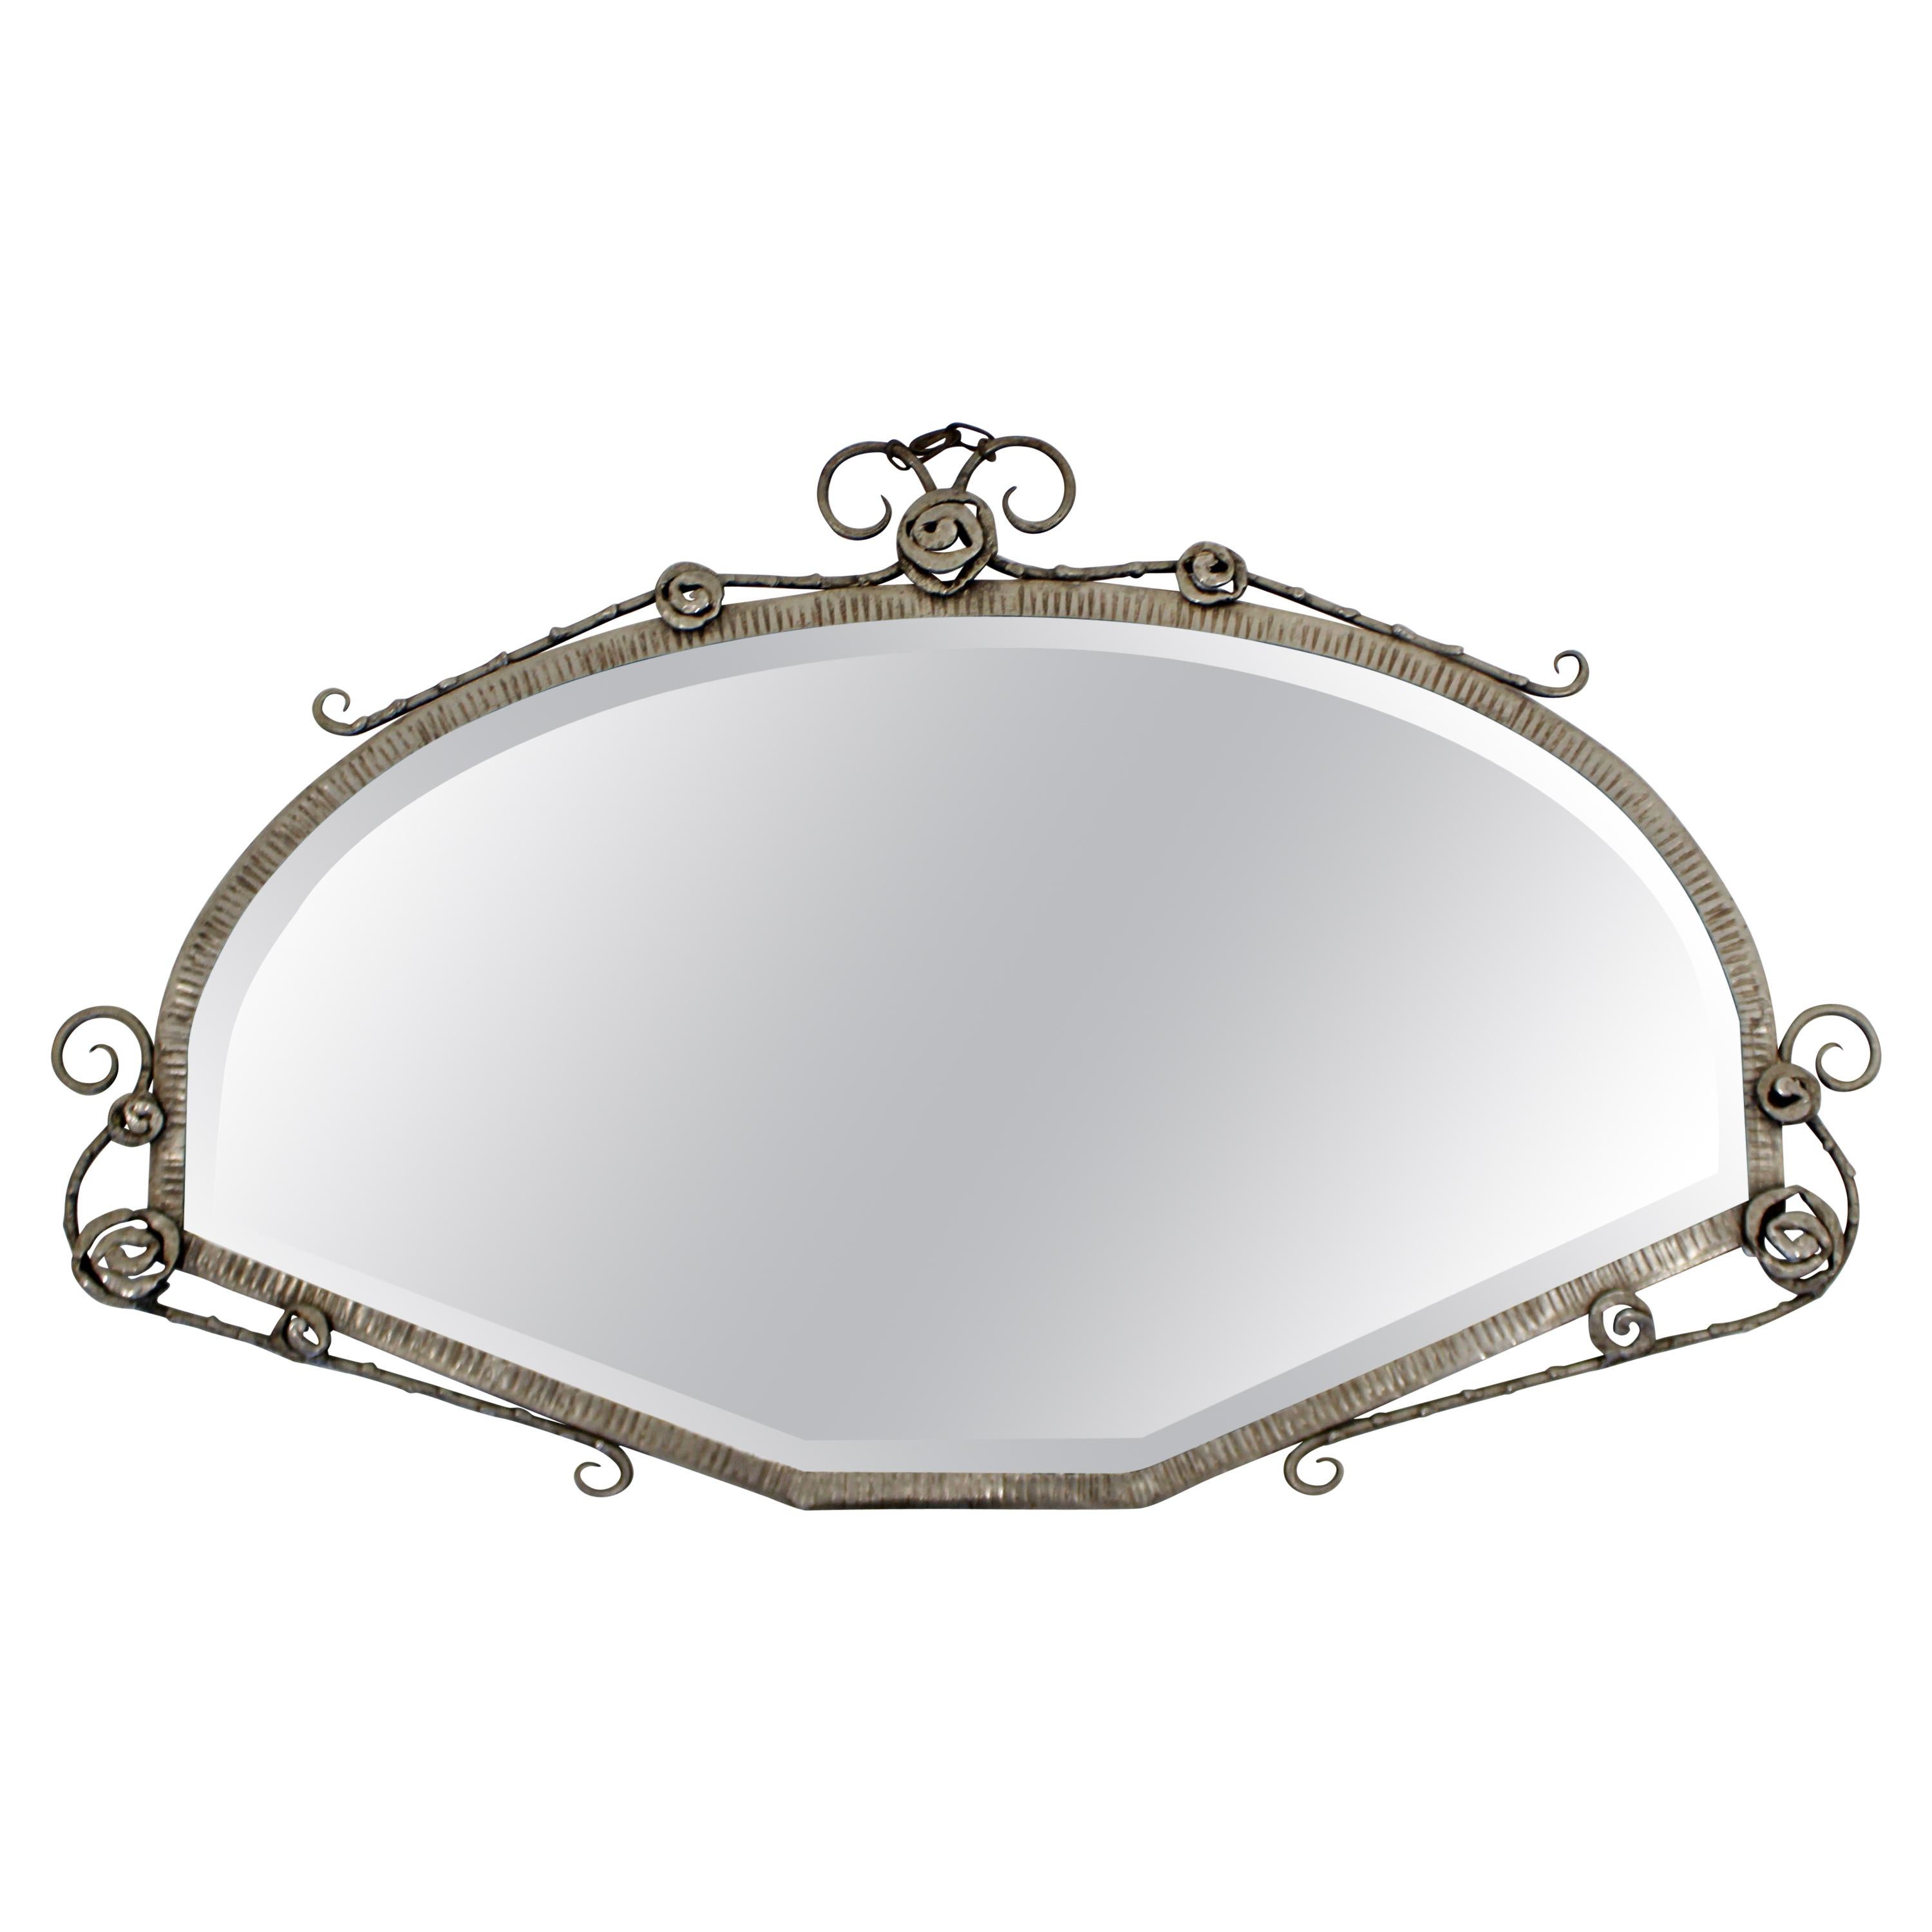 Art Deco French Forge Iron Wall Mirror Attributed to P. Kiss or E. Brandt